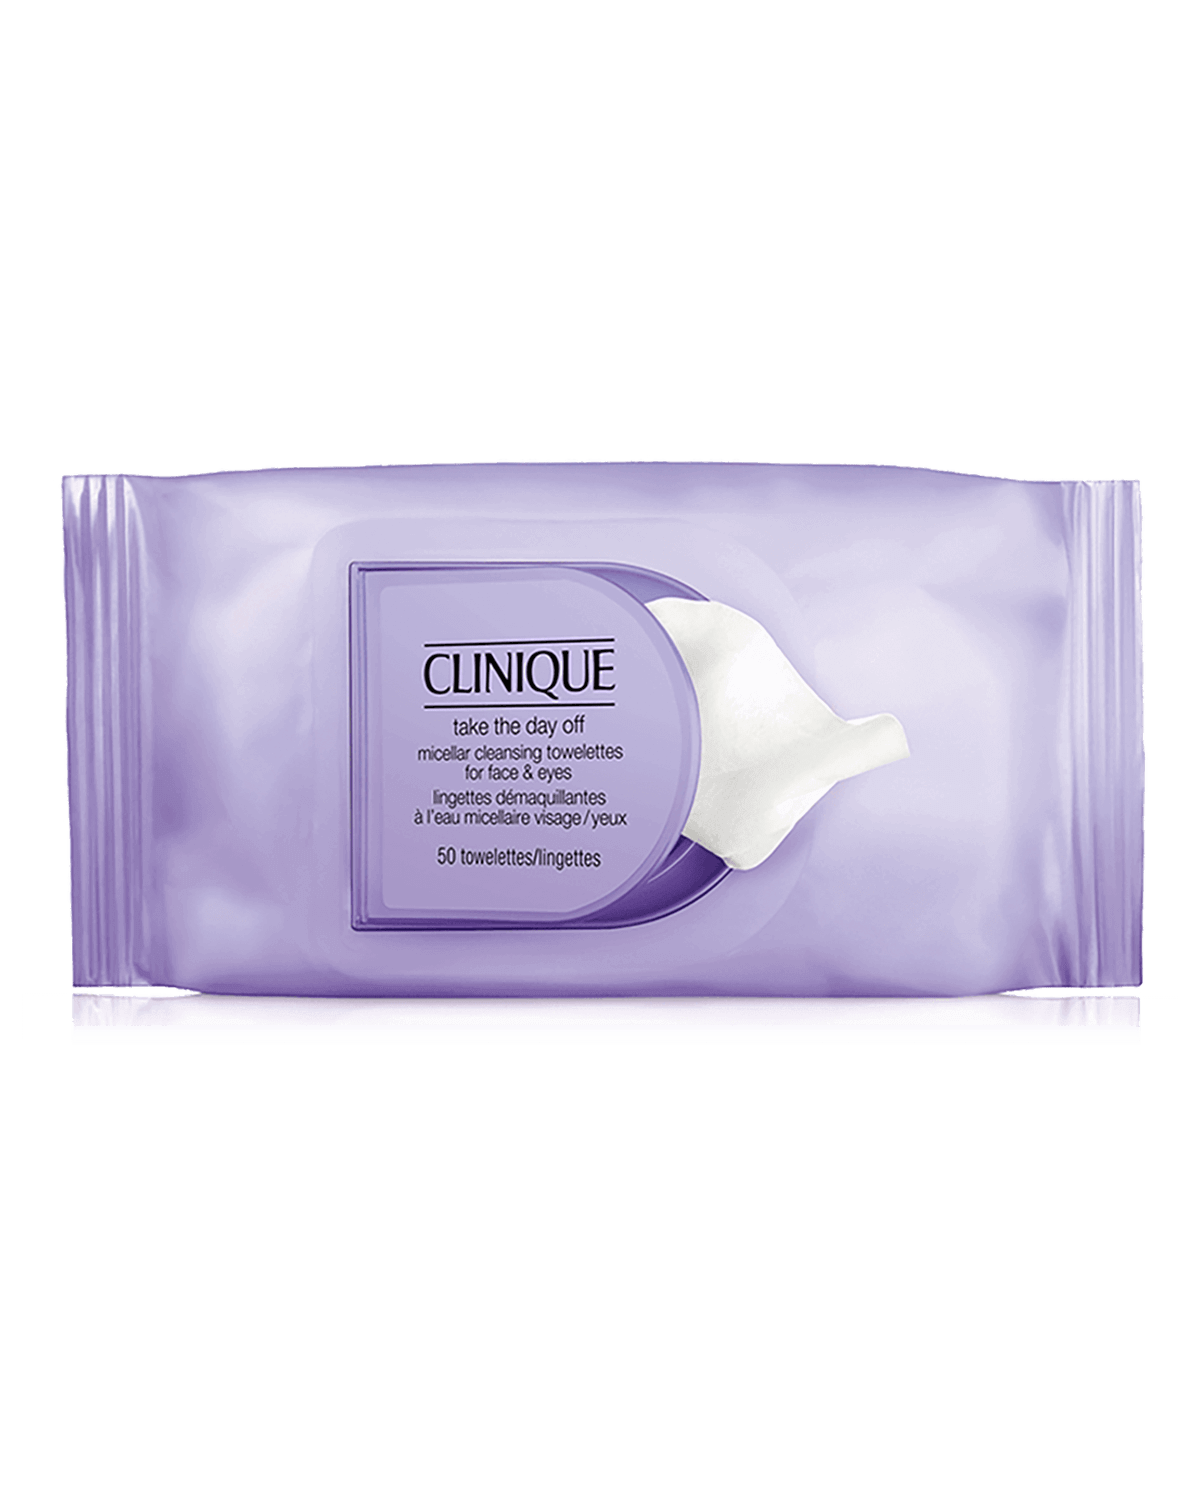 Take the Day Off™ Micellar Cleansing Towelettes for Face & Eyes